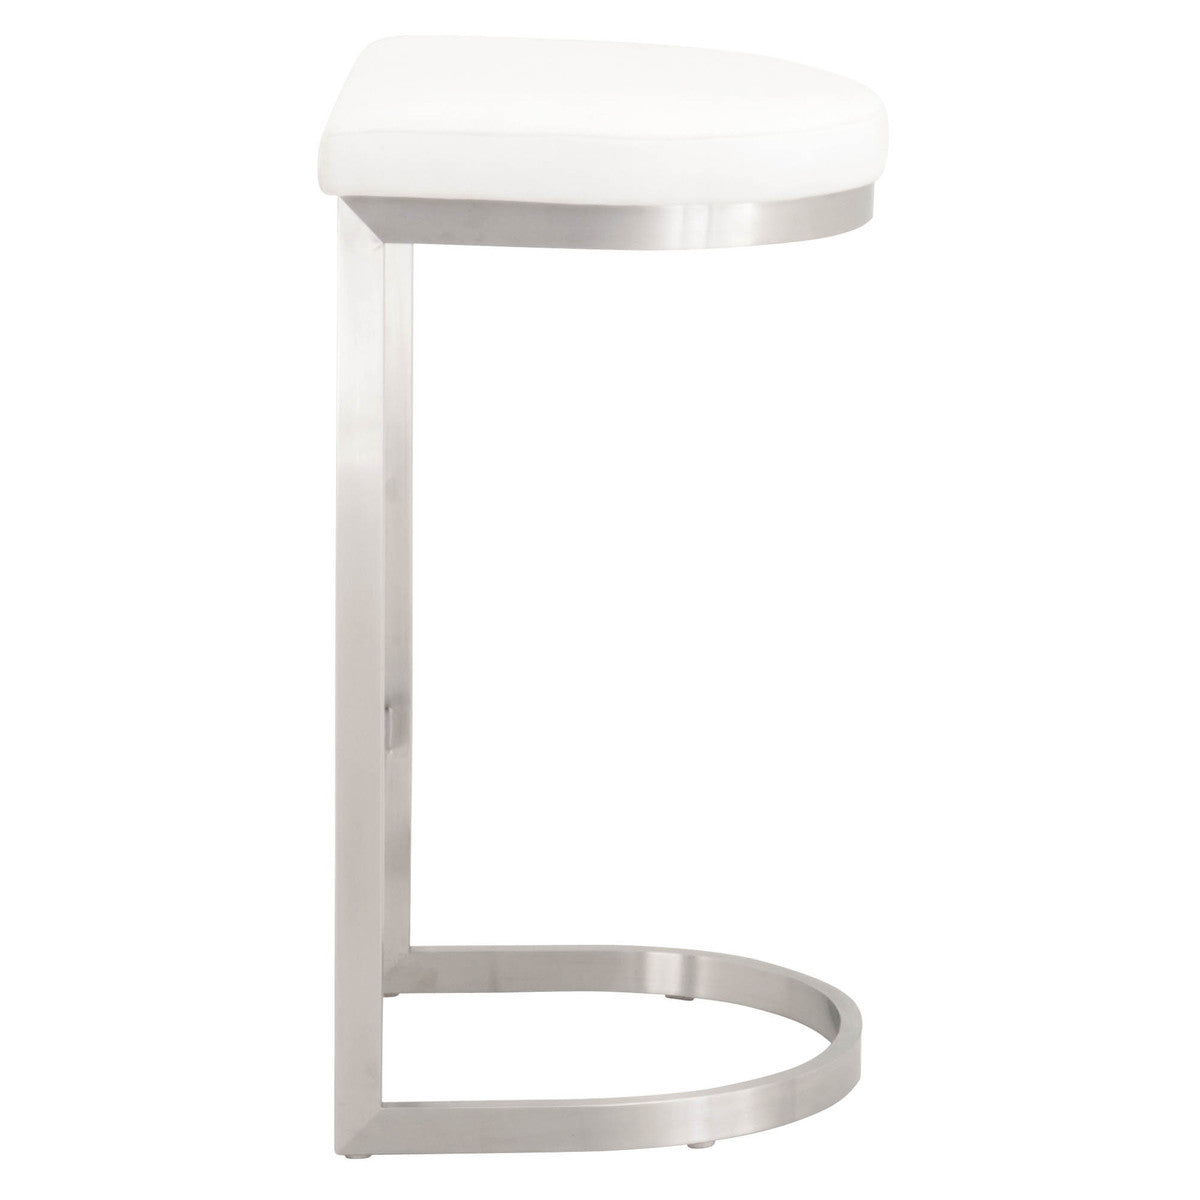 Cresta Counter Stool in Brushed Stainless Steel